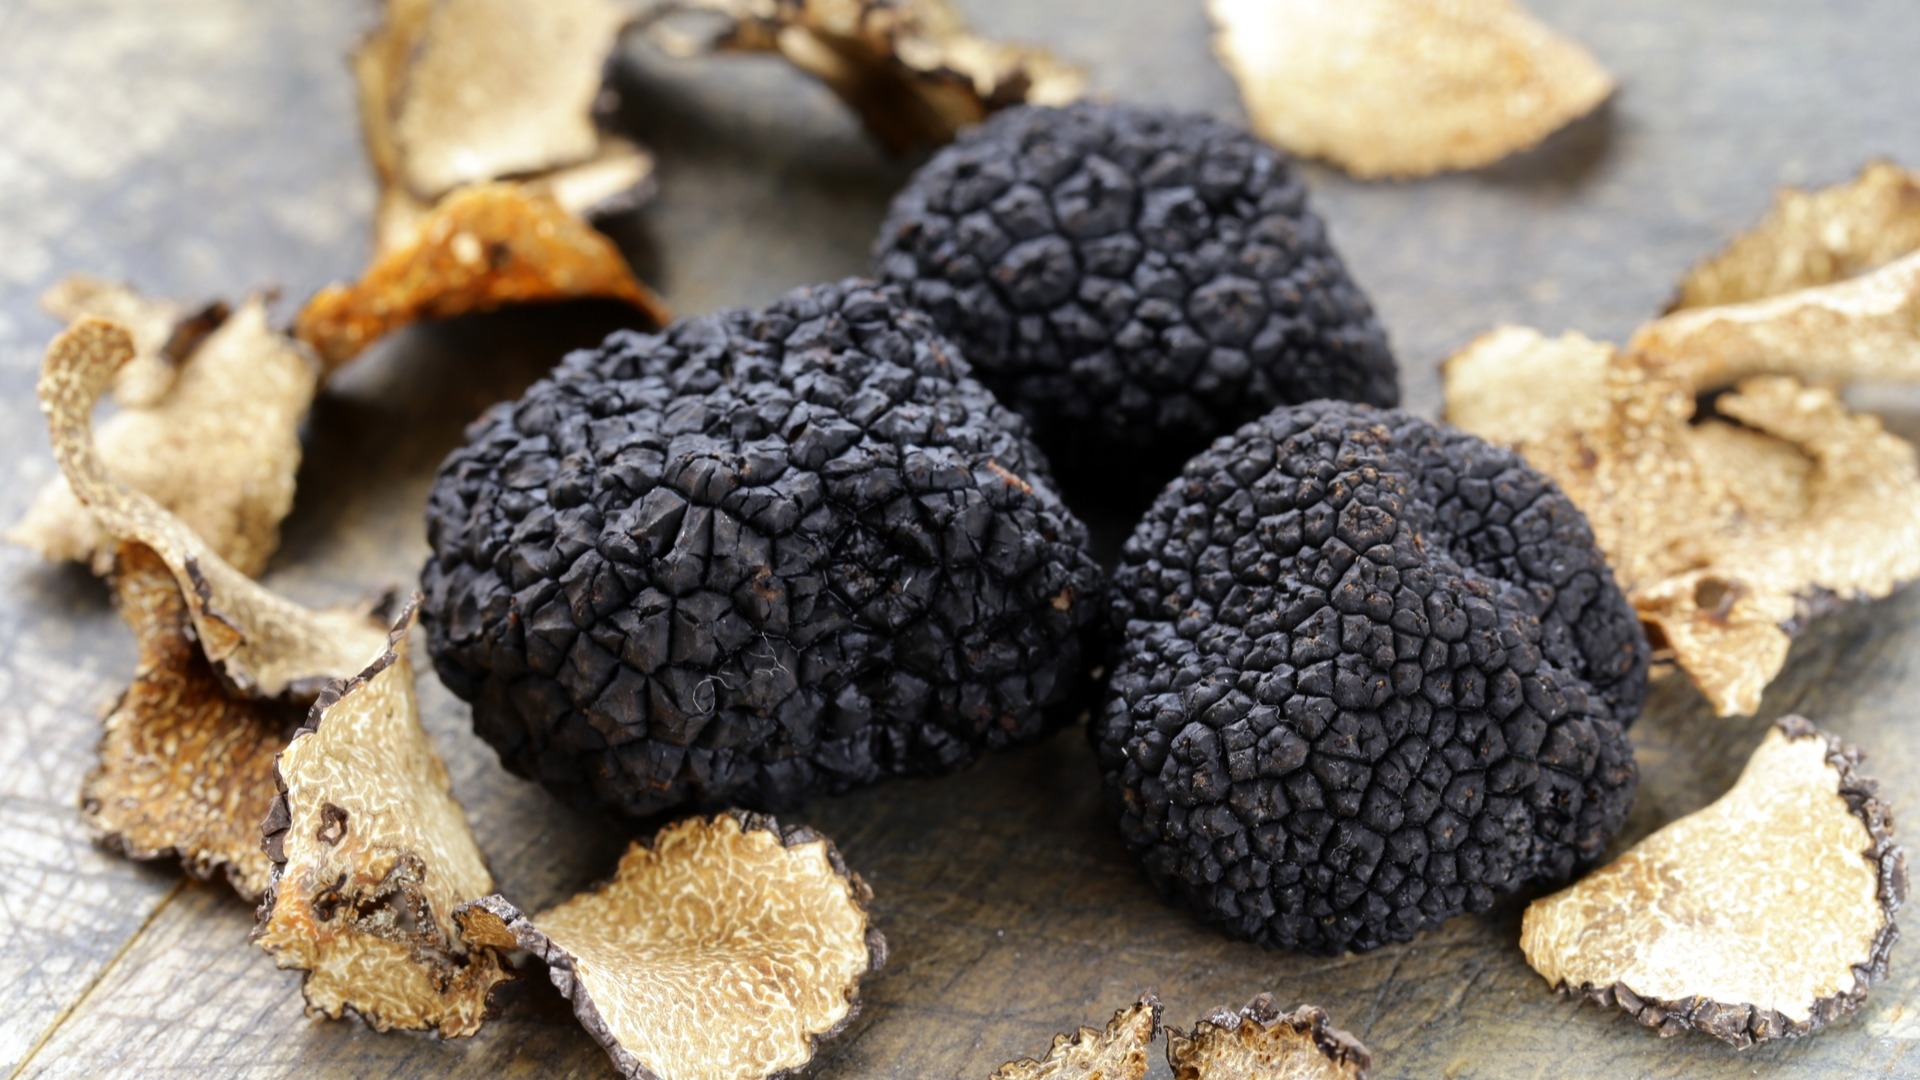 Truffle Mushrooms: To check all types of cancer